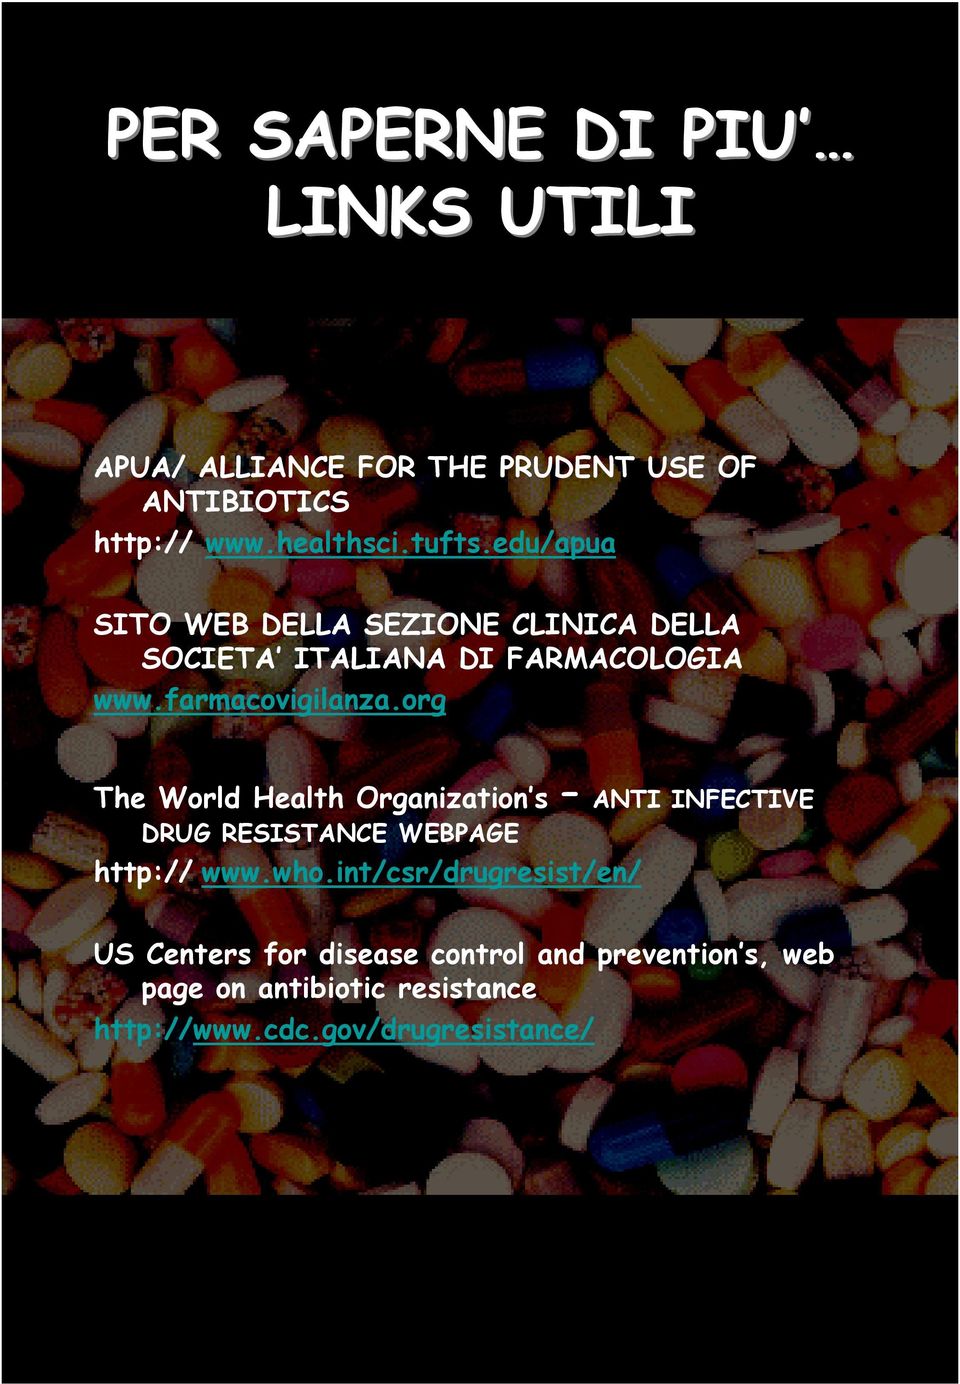 org The World Health Organization s ANTI INFECTIVE DRUG RESISTANCE WEBPAGE http:// www.who.